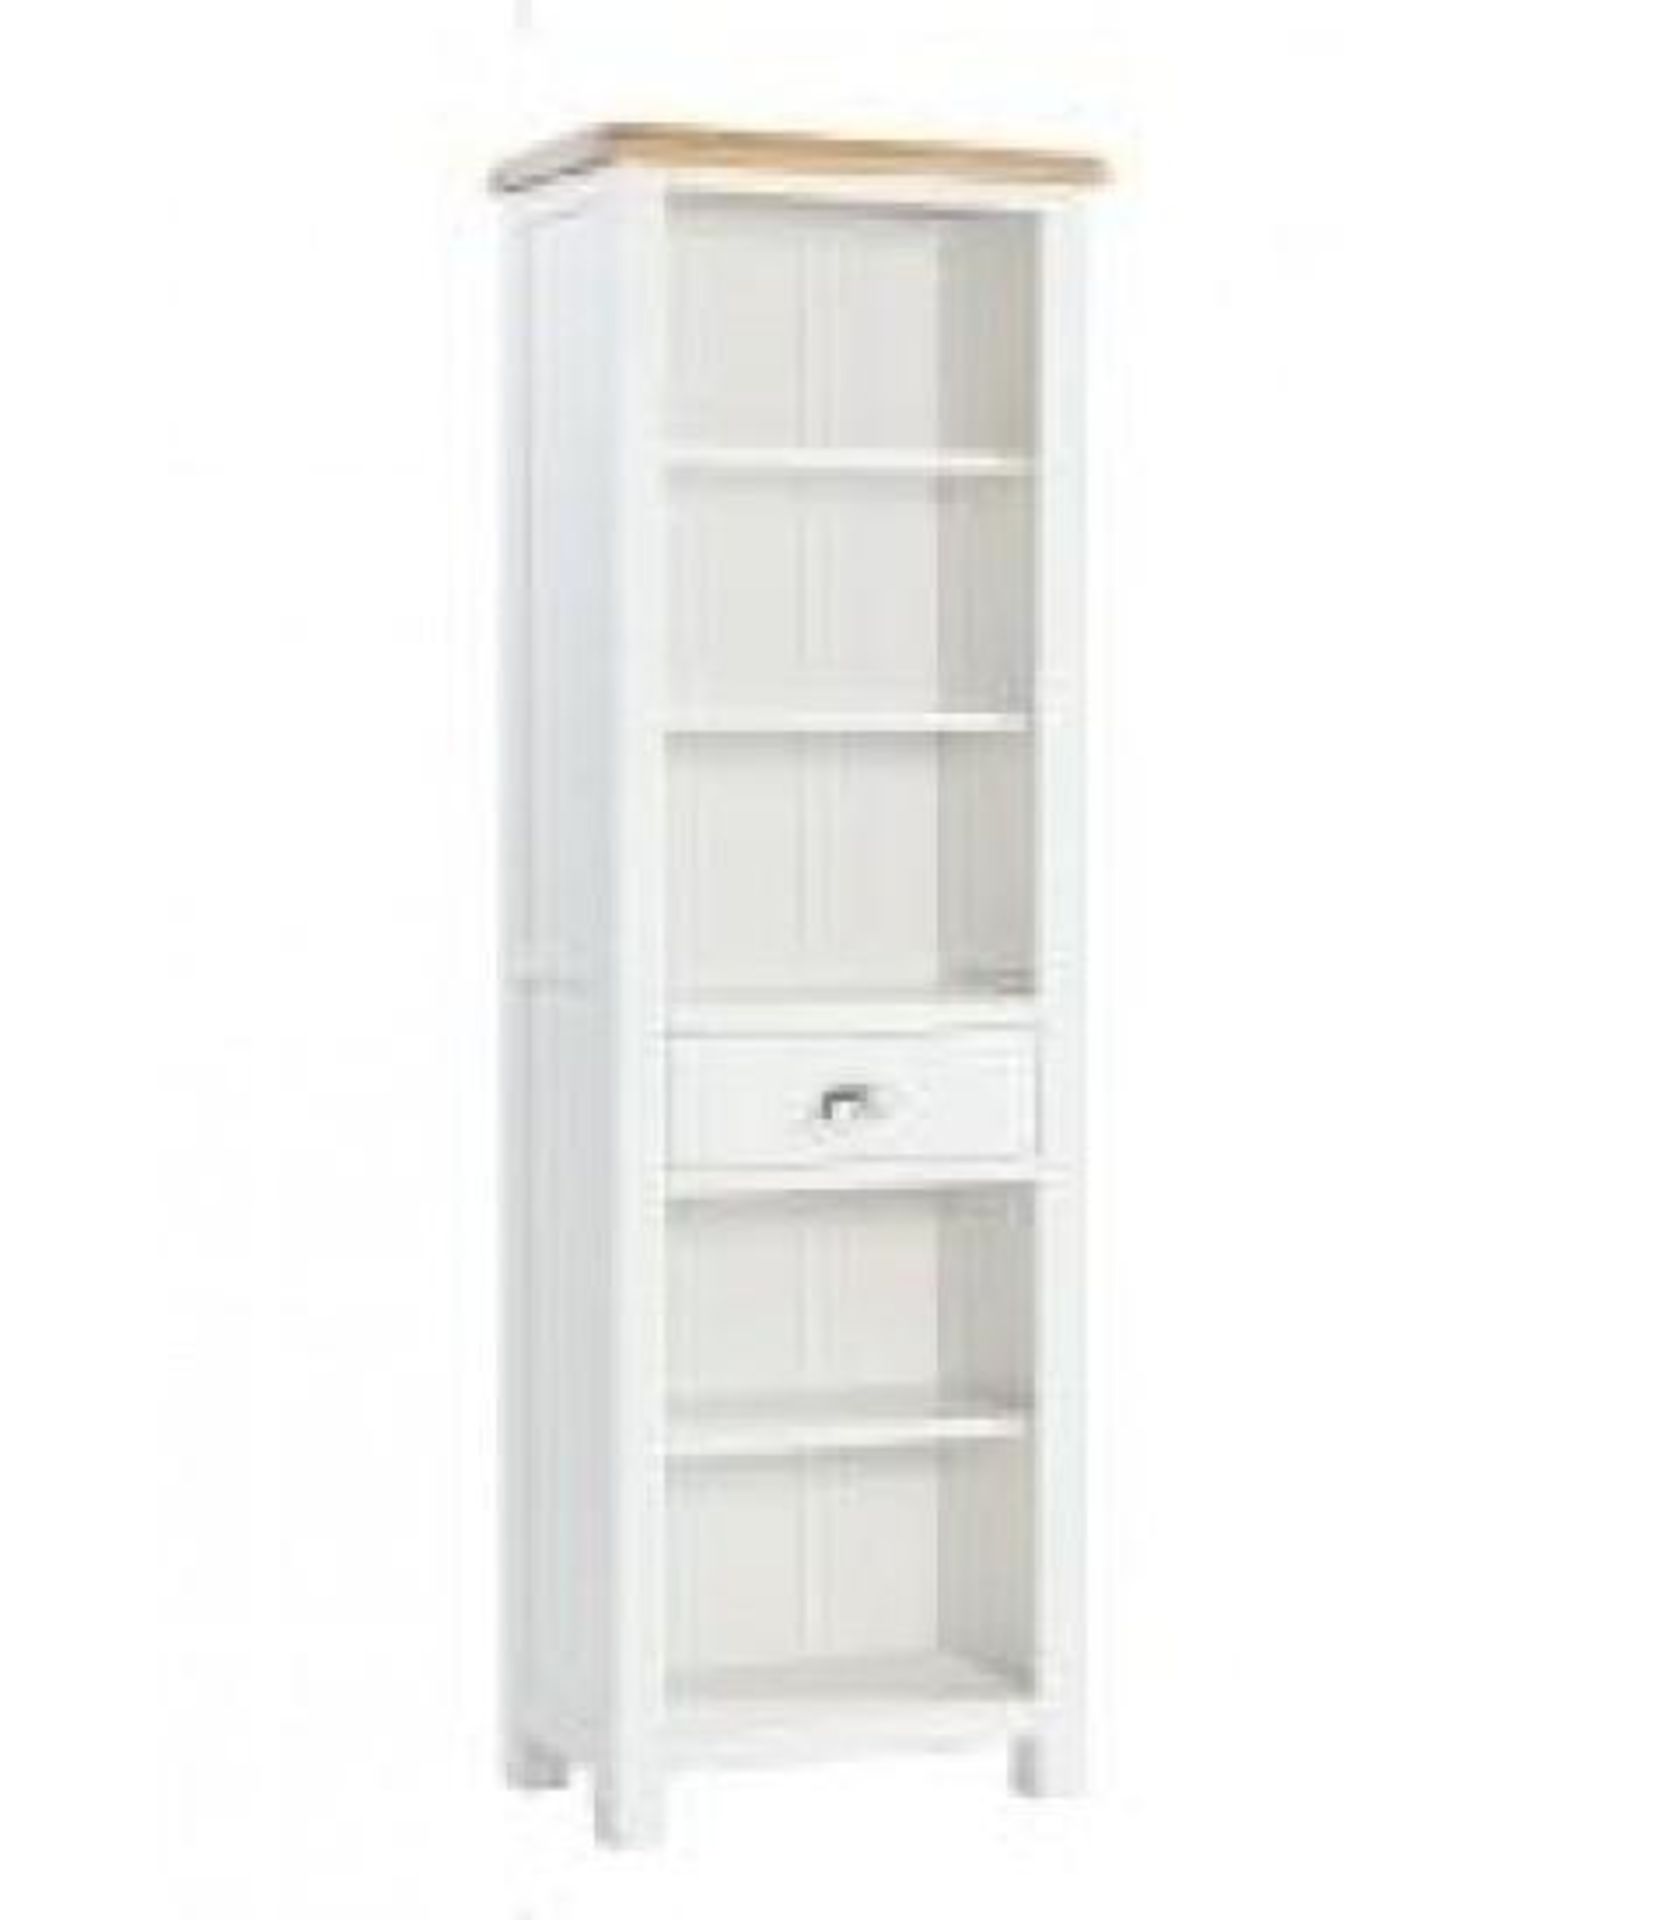 BRAND NEW & BOXED clevedon tall bookcase